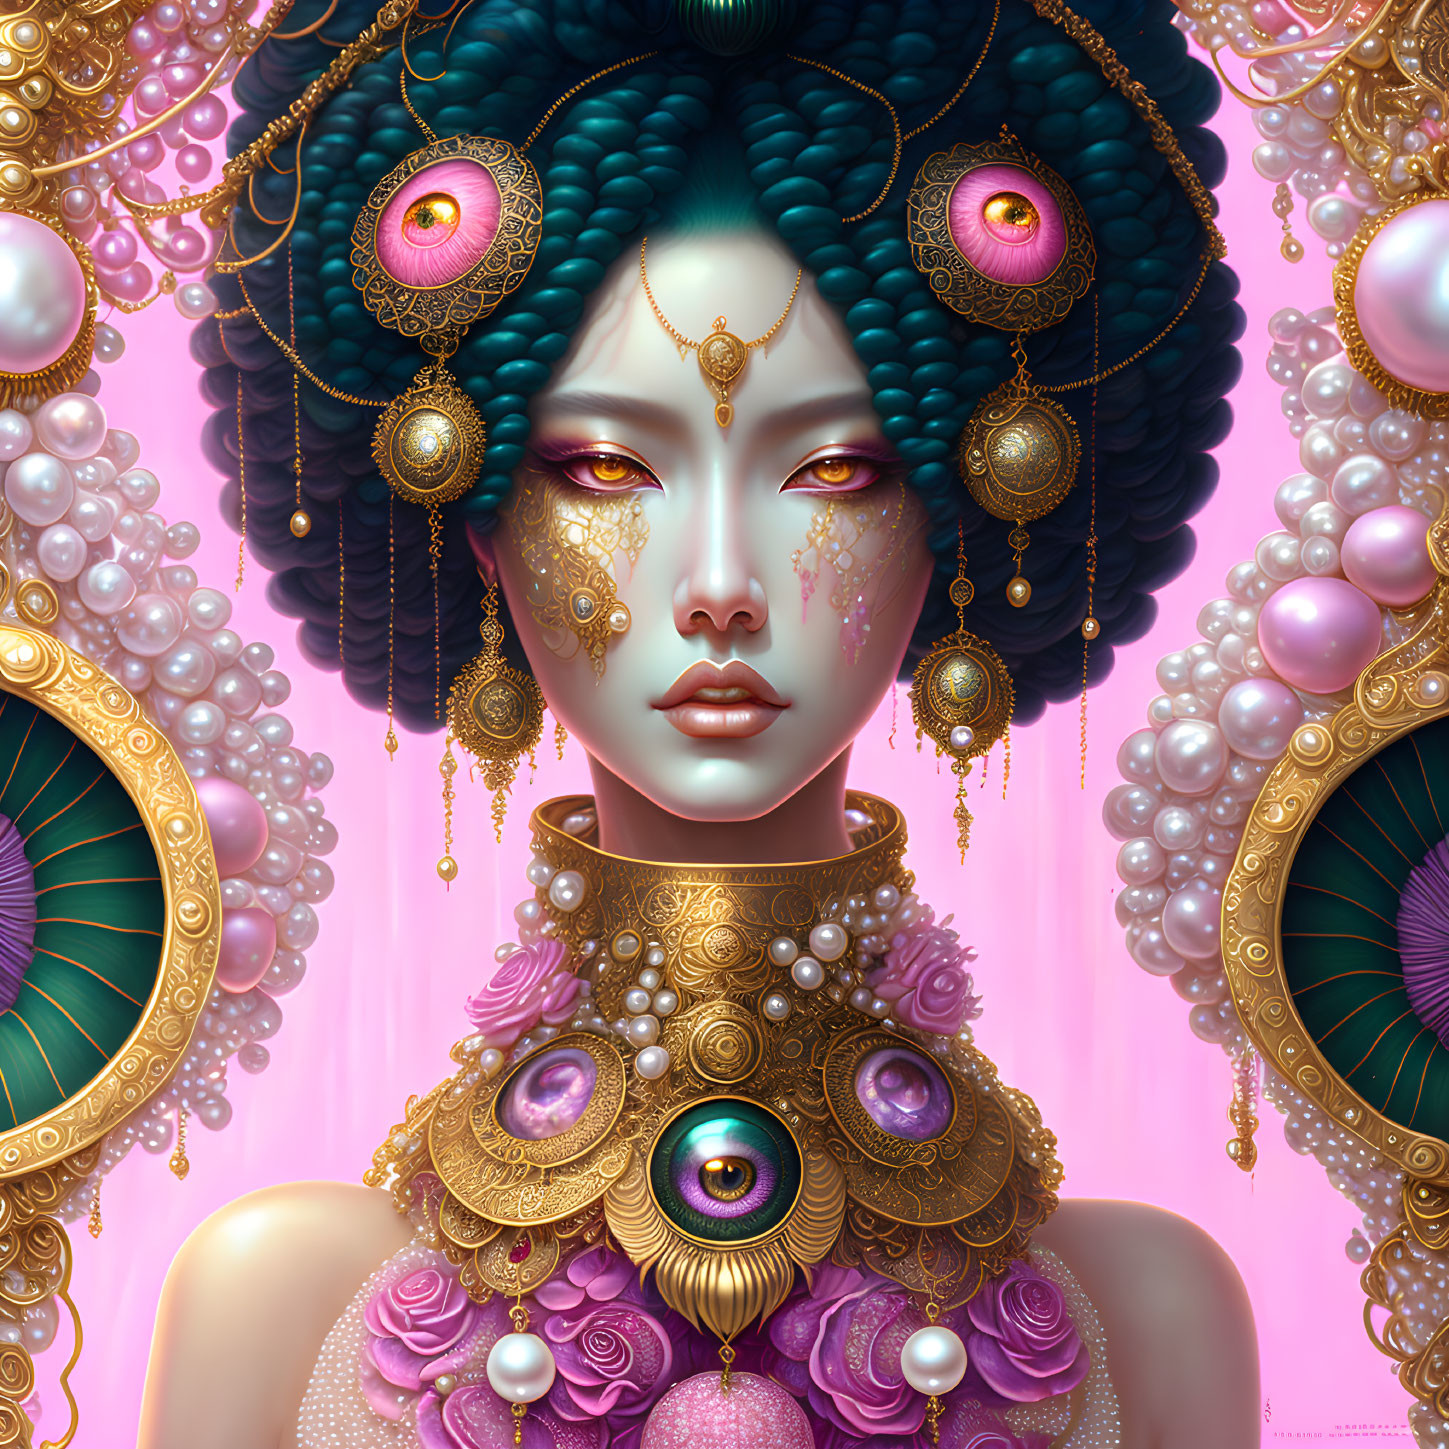 Surreal portrait of female with blue skin and ornate gold jewelry